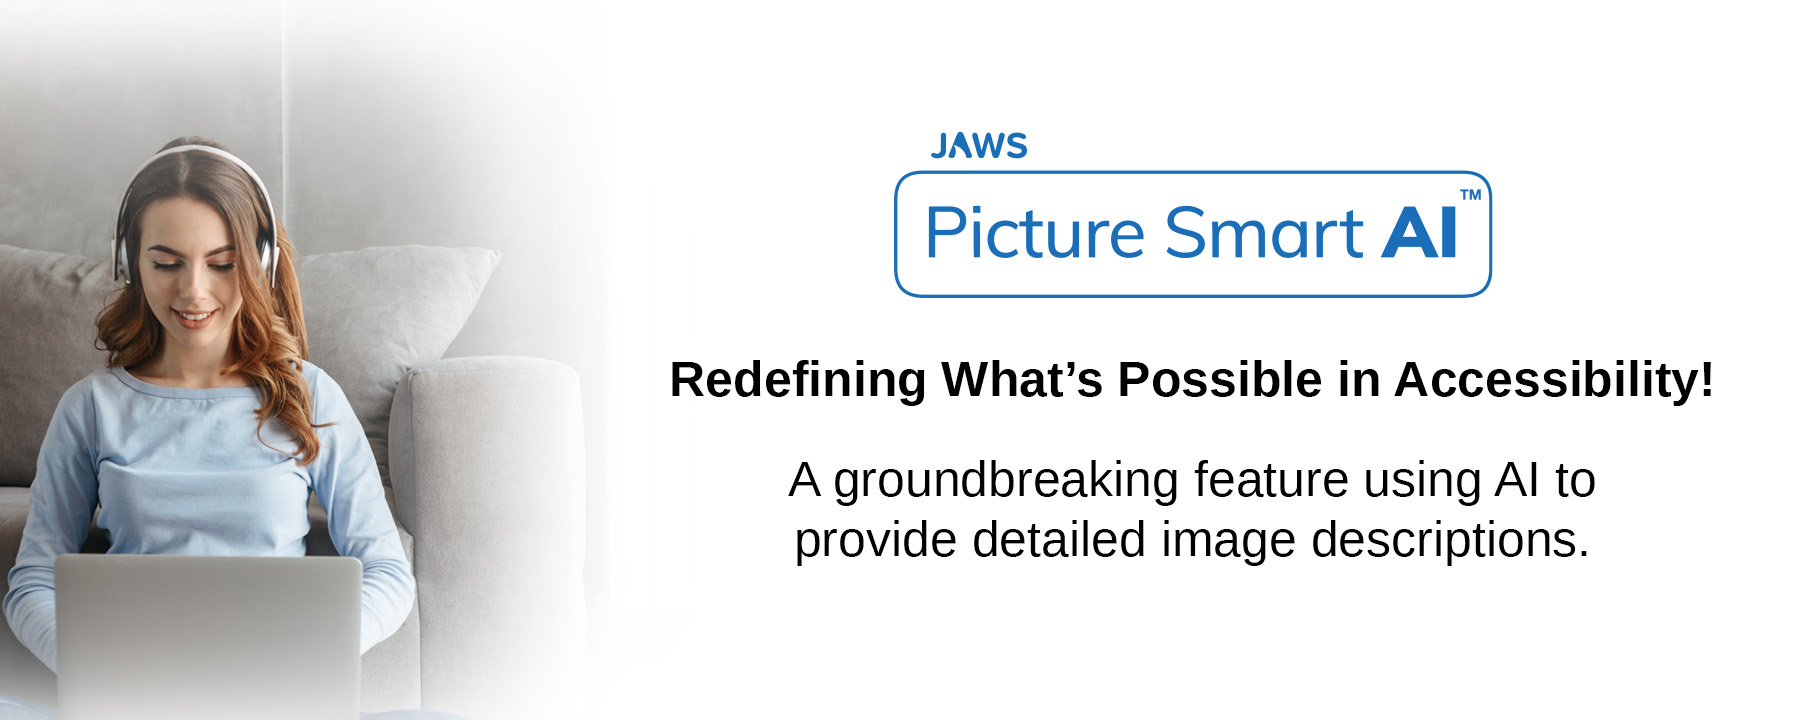 JAWS Picture Smart AI. Redefining what's possible in accessibility! A groundbreaking feature using AI to provide detailed image descriptions.